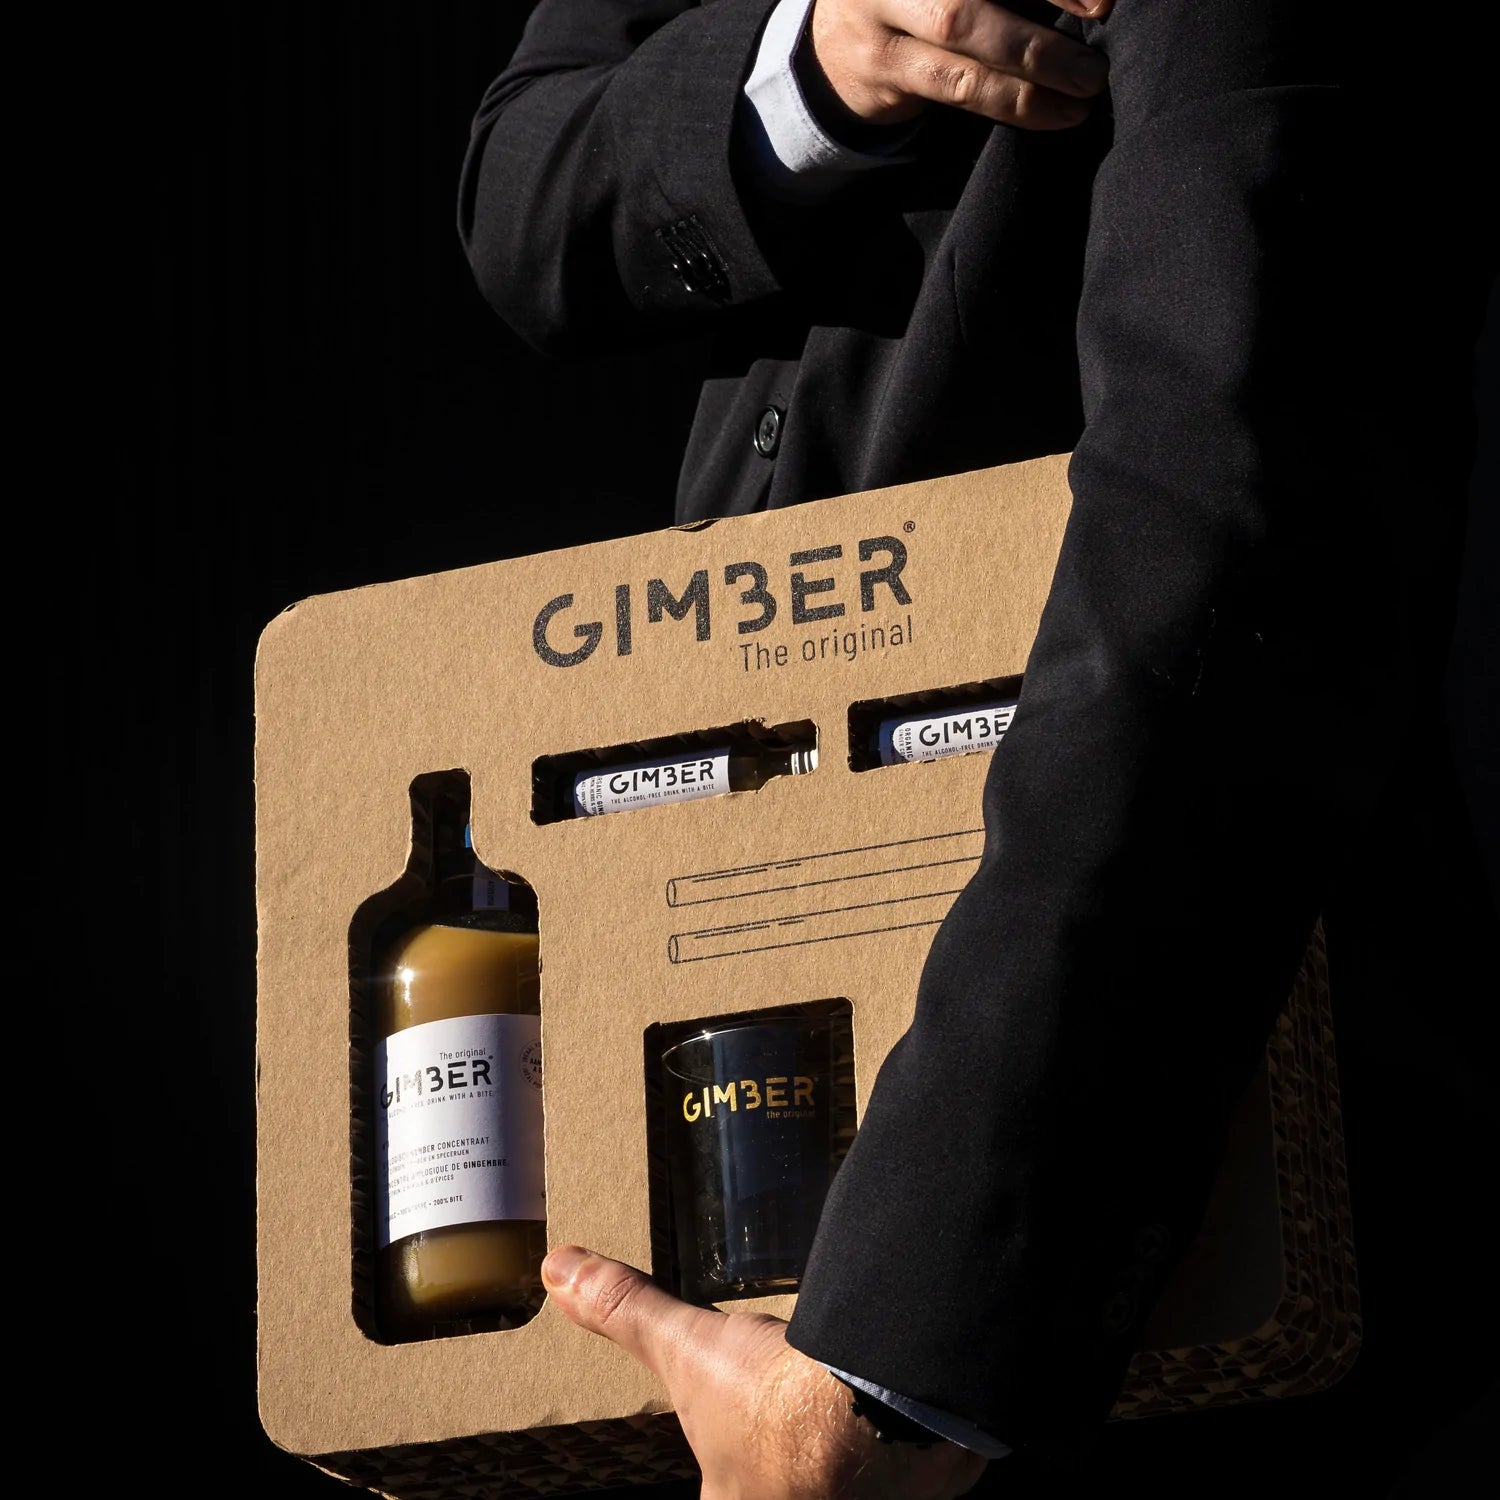 Gimber Gift Pack - the perfect gift